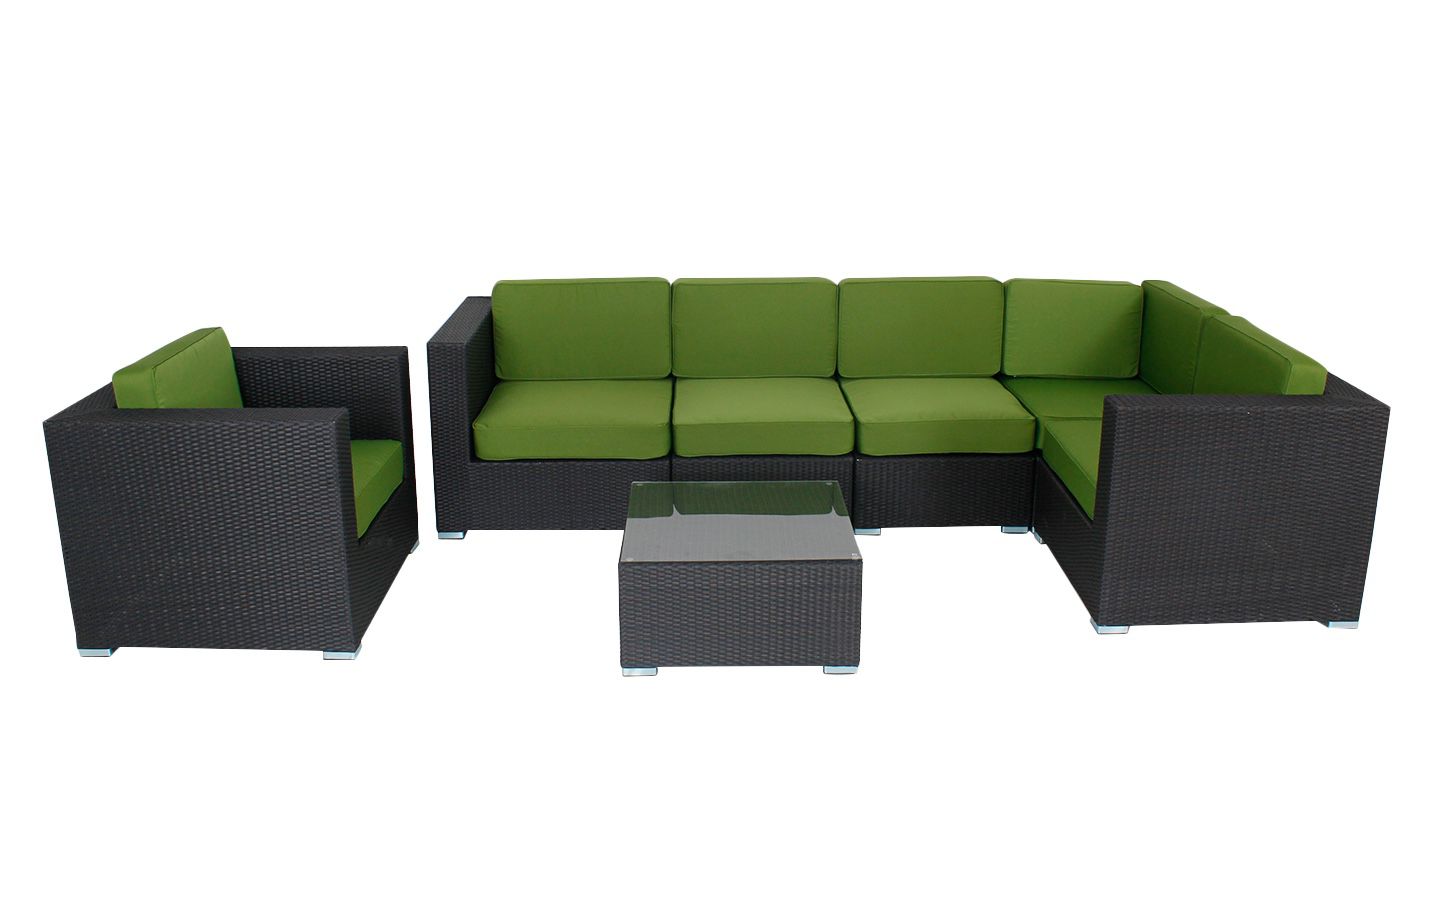 Patio furniture sectional no assemble needed aluminum frame easy financing